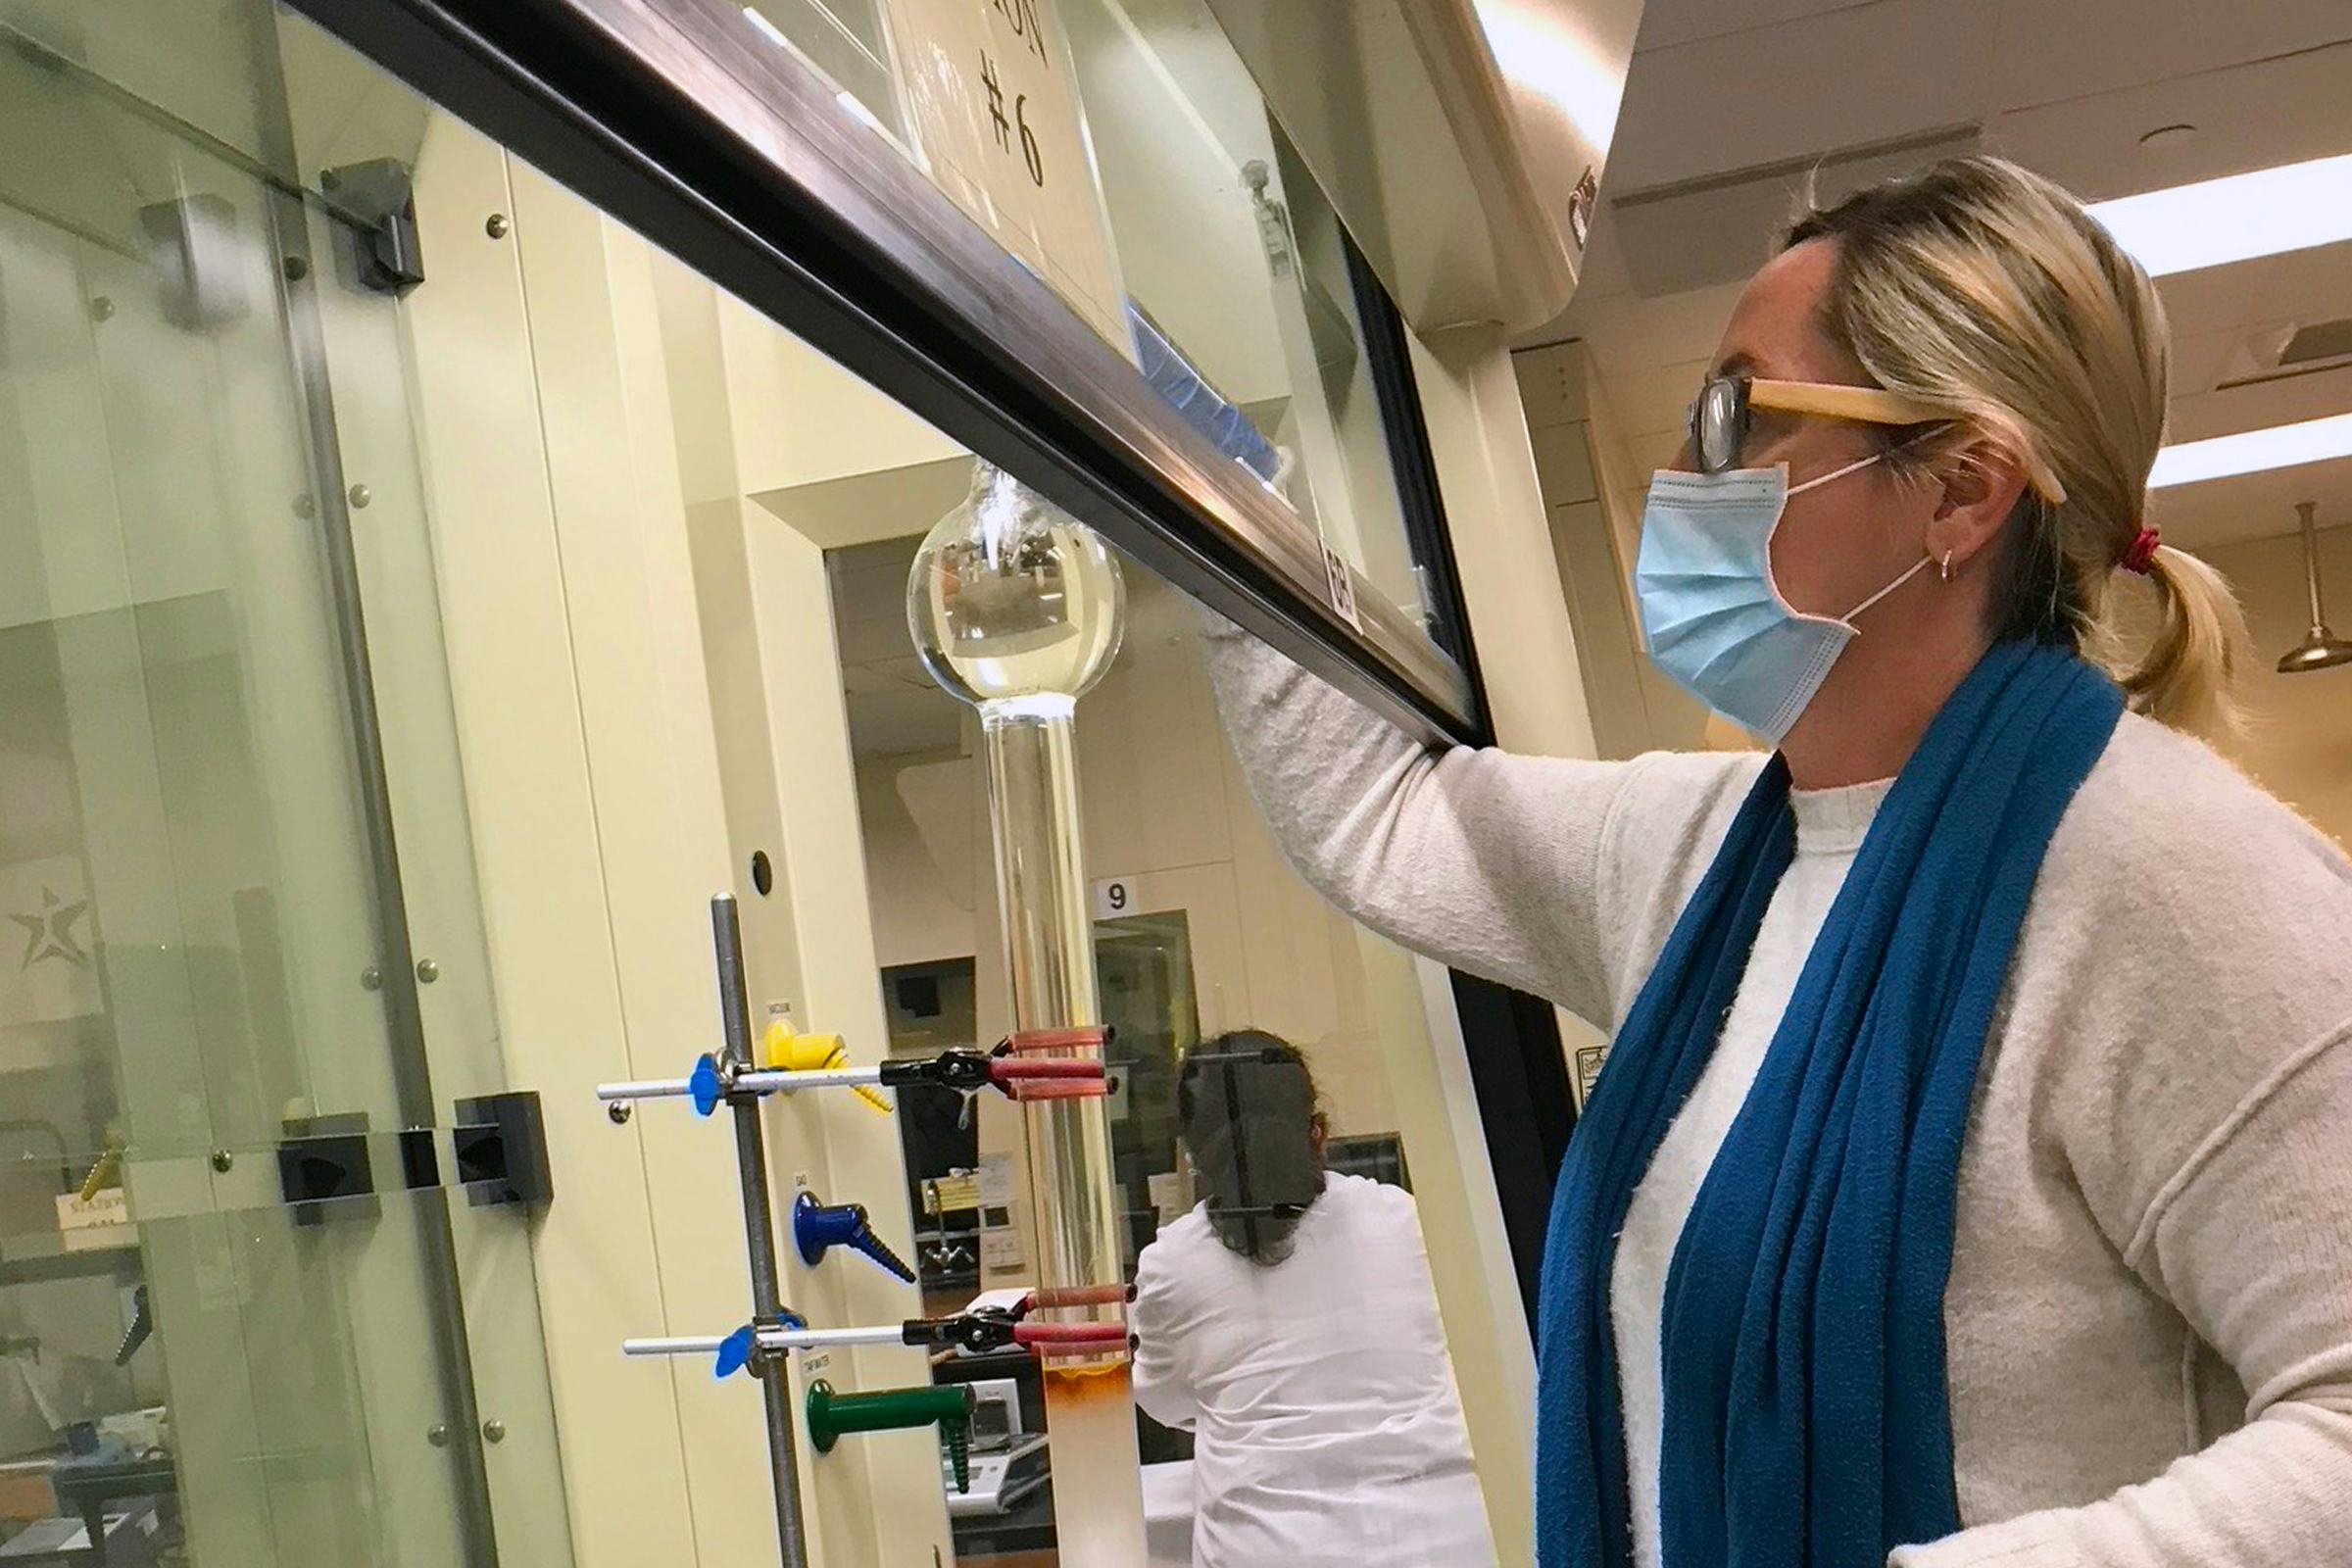 Shawn Amorde sets up a separations column which is used to purify chemicals after a reaction. Photo credit: Jackie Stamatedes